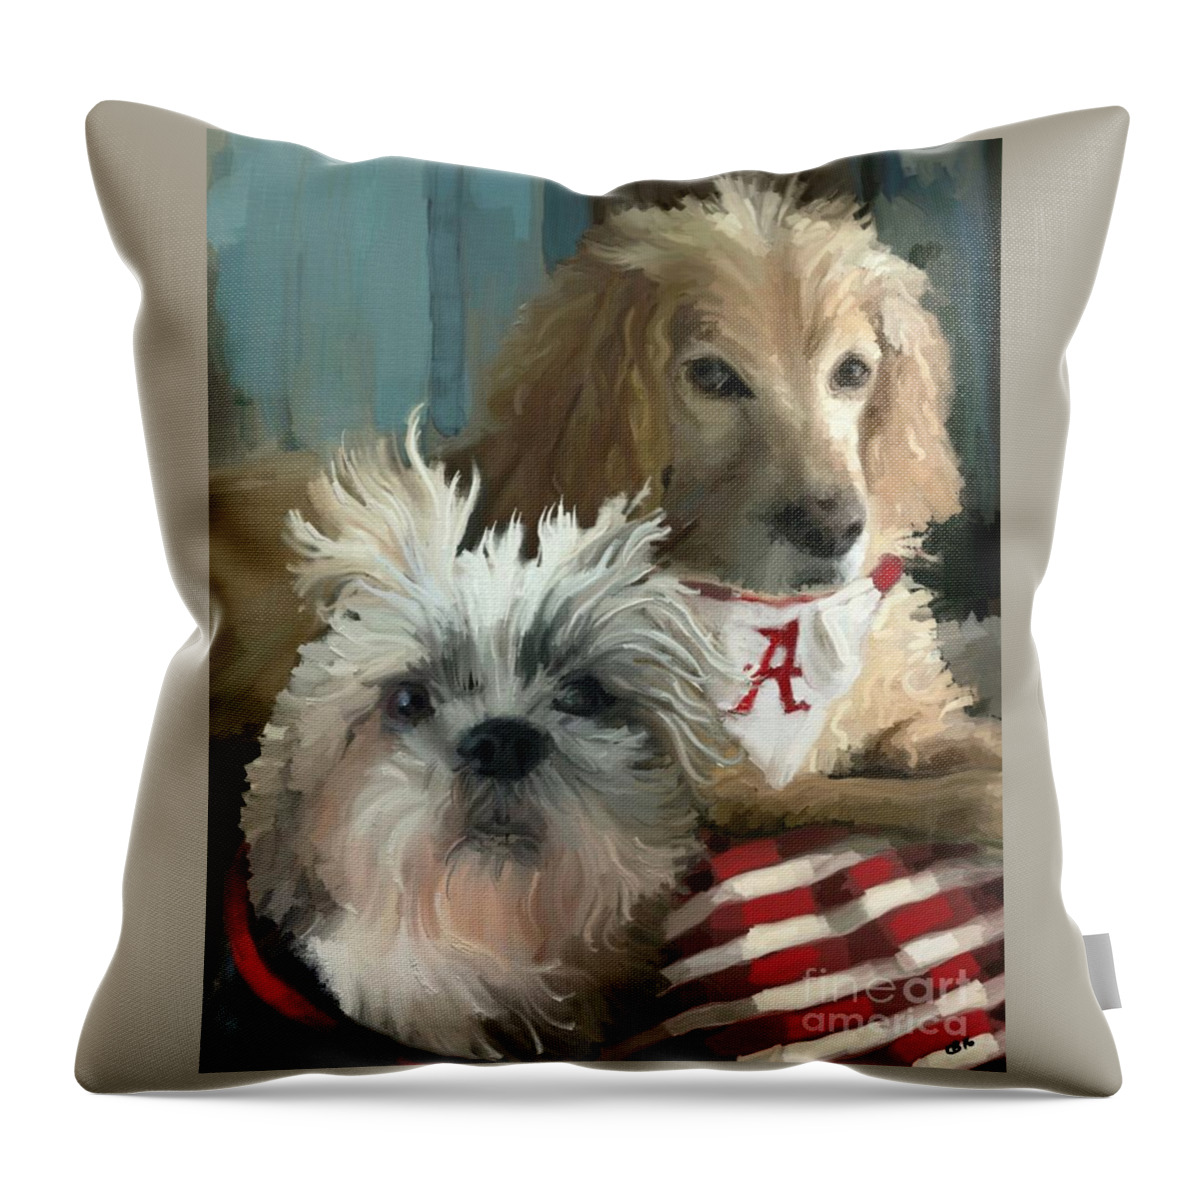 Puppy Throw Pillow featuring the painting Game Day by Carrie Joy Byrnes